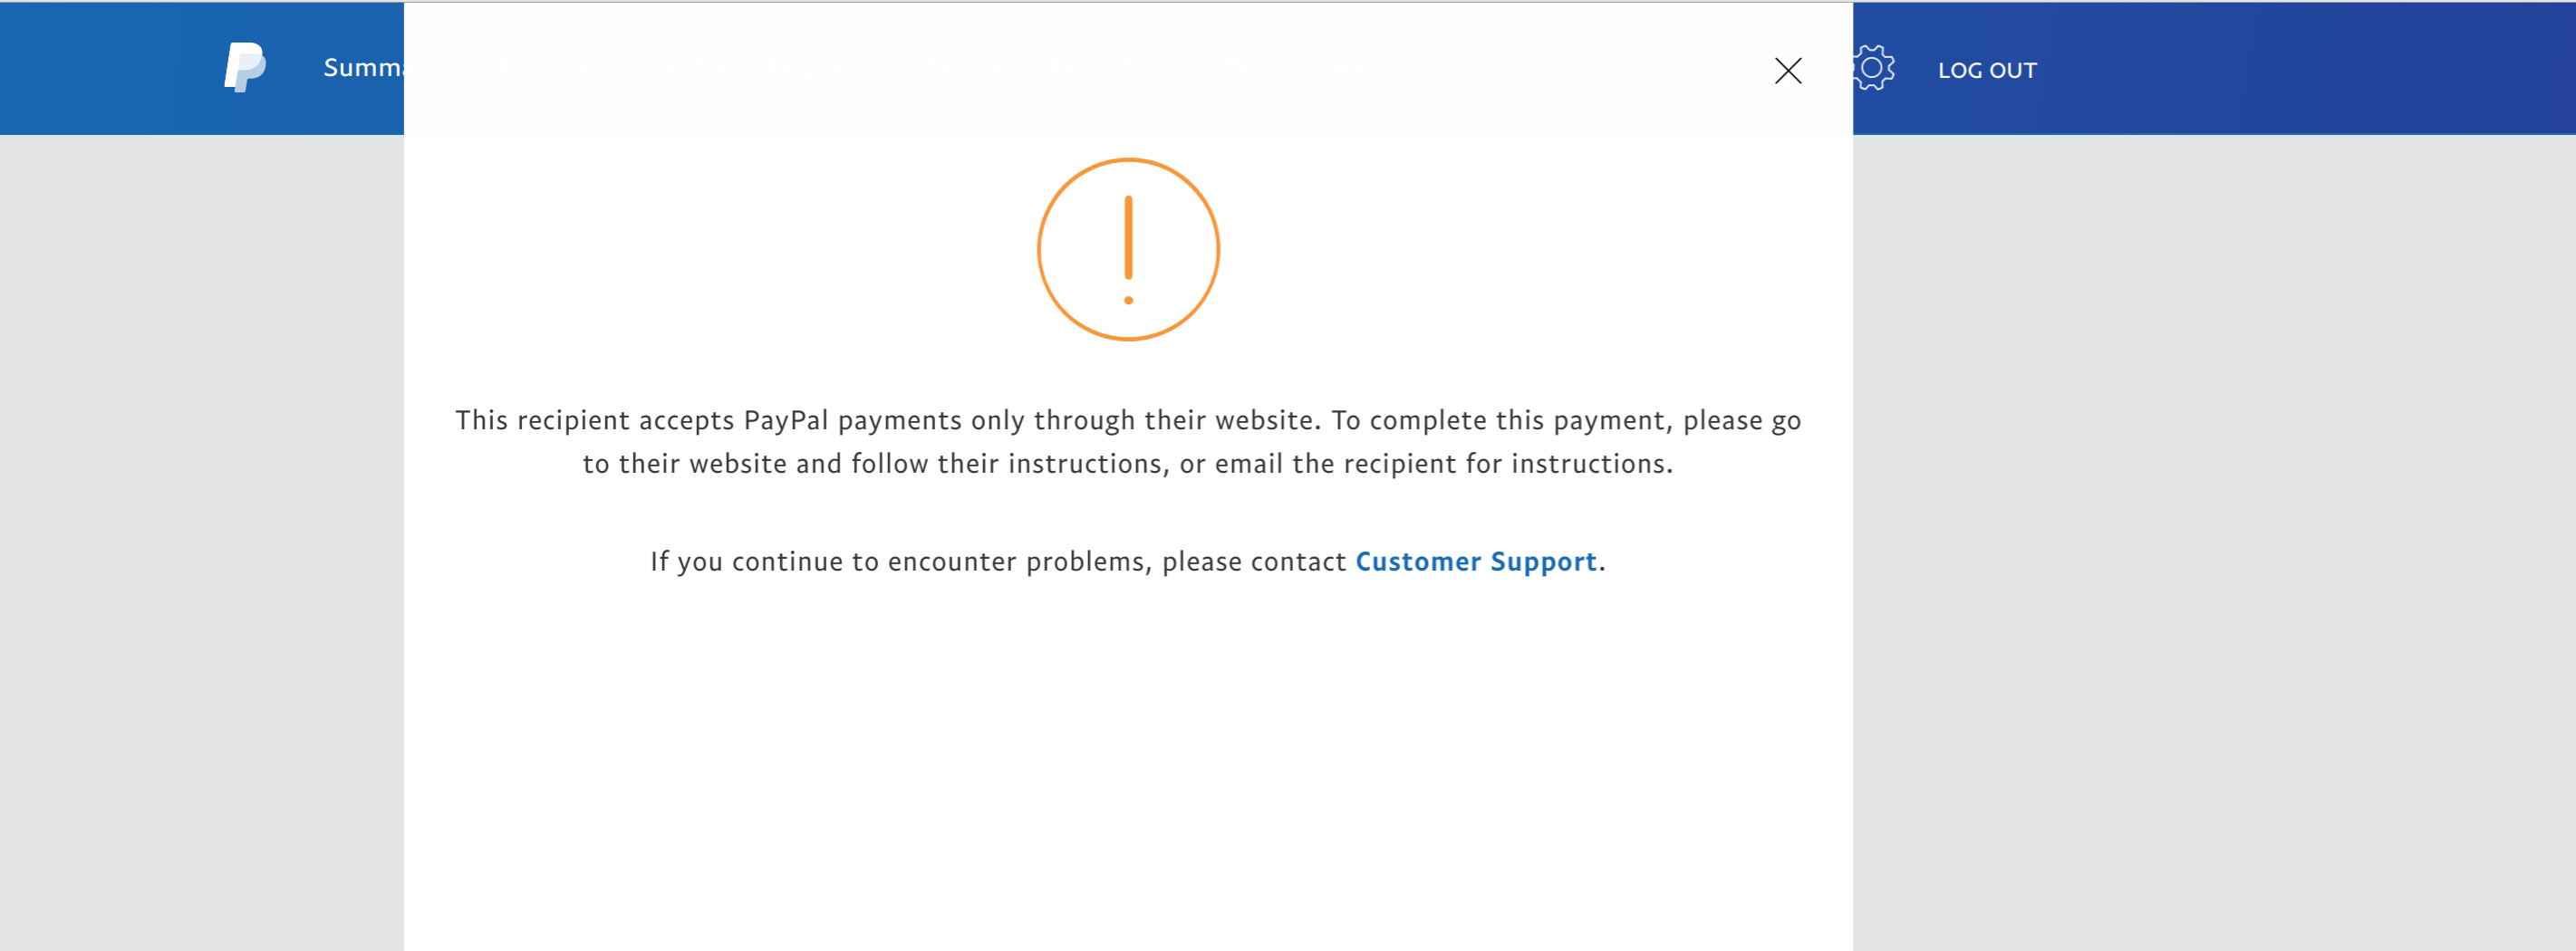 Error while trying to send a money to my family me... - PayPal Community